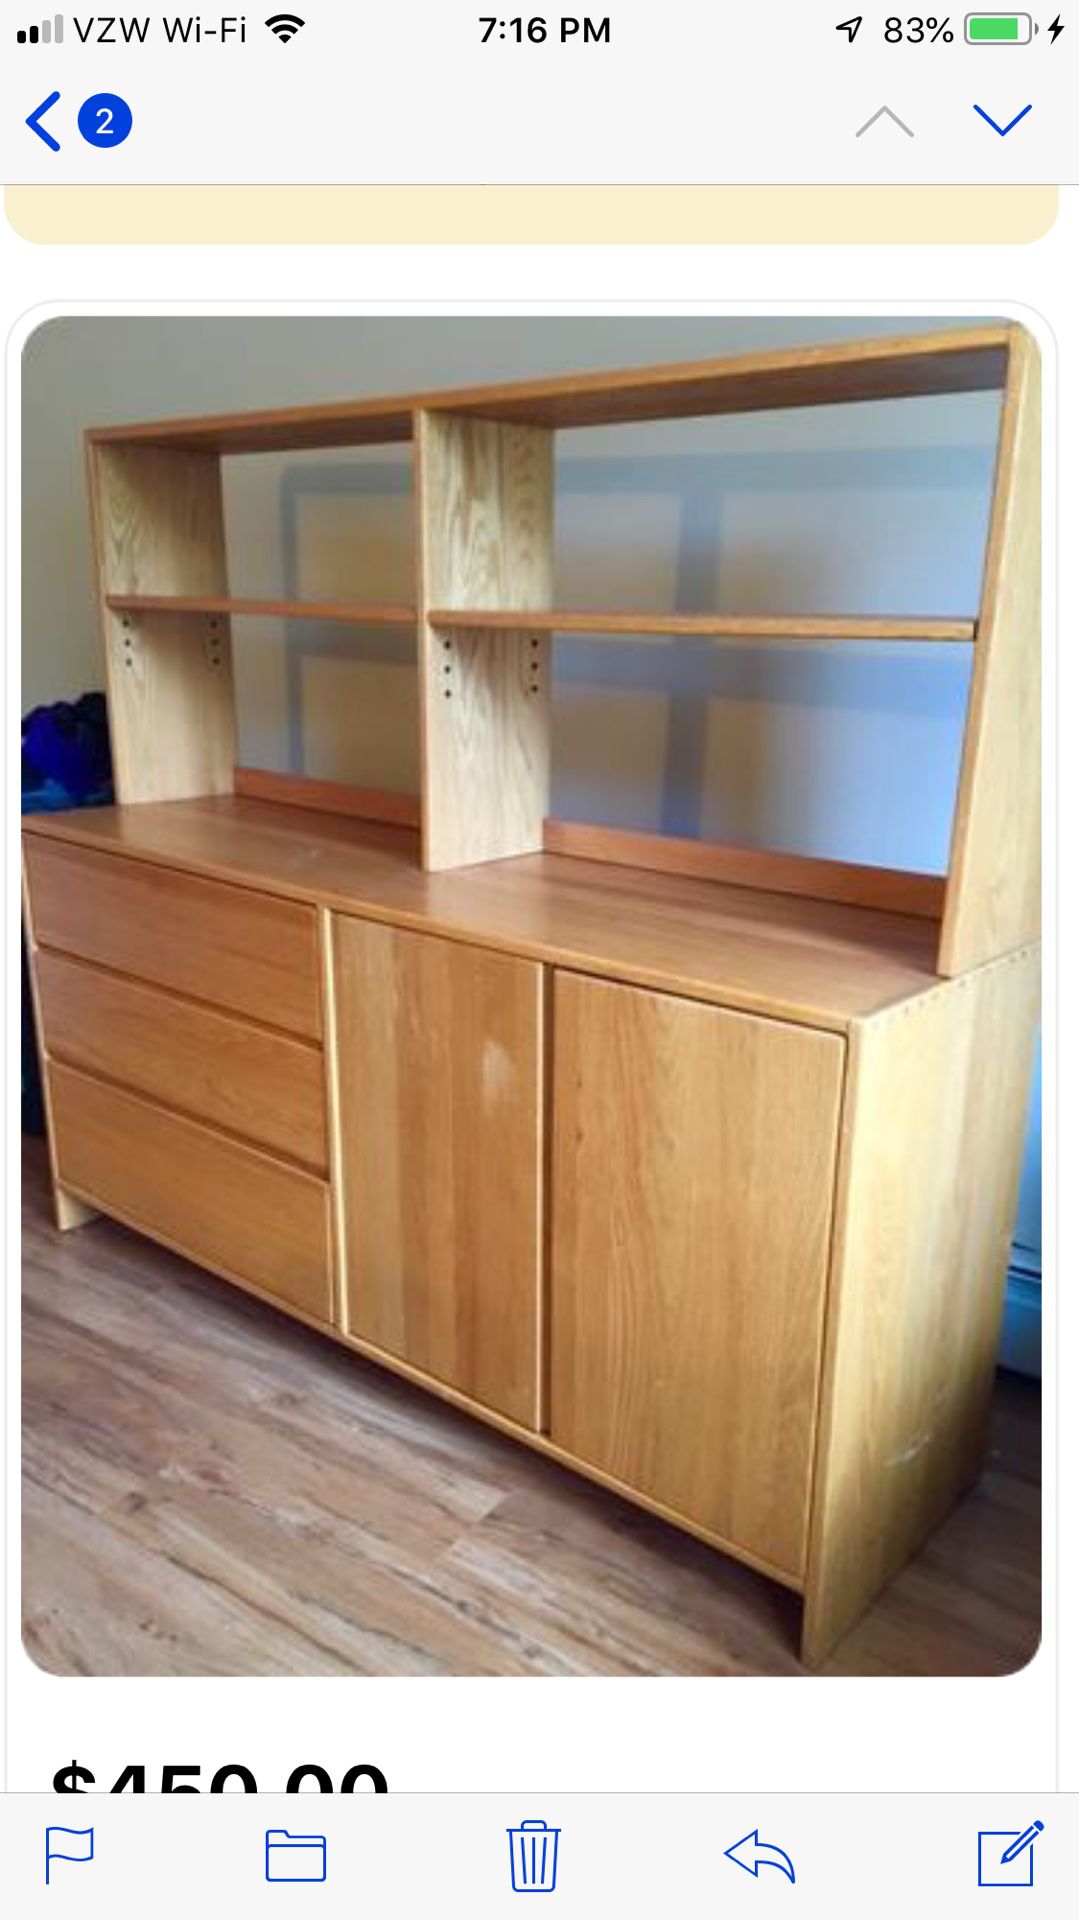 Solid Oak Wood dresser with three draws and two door cabinet with shelf. This will last for generations. No particle board or laminated wood. Top she